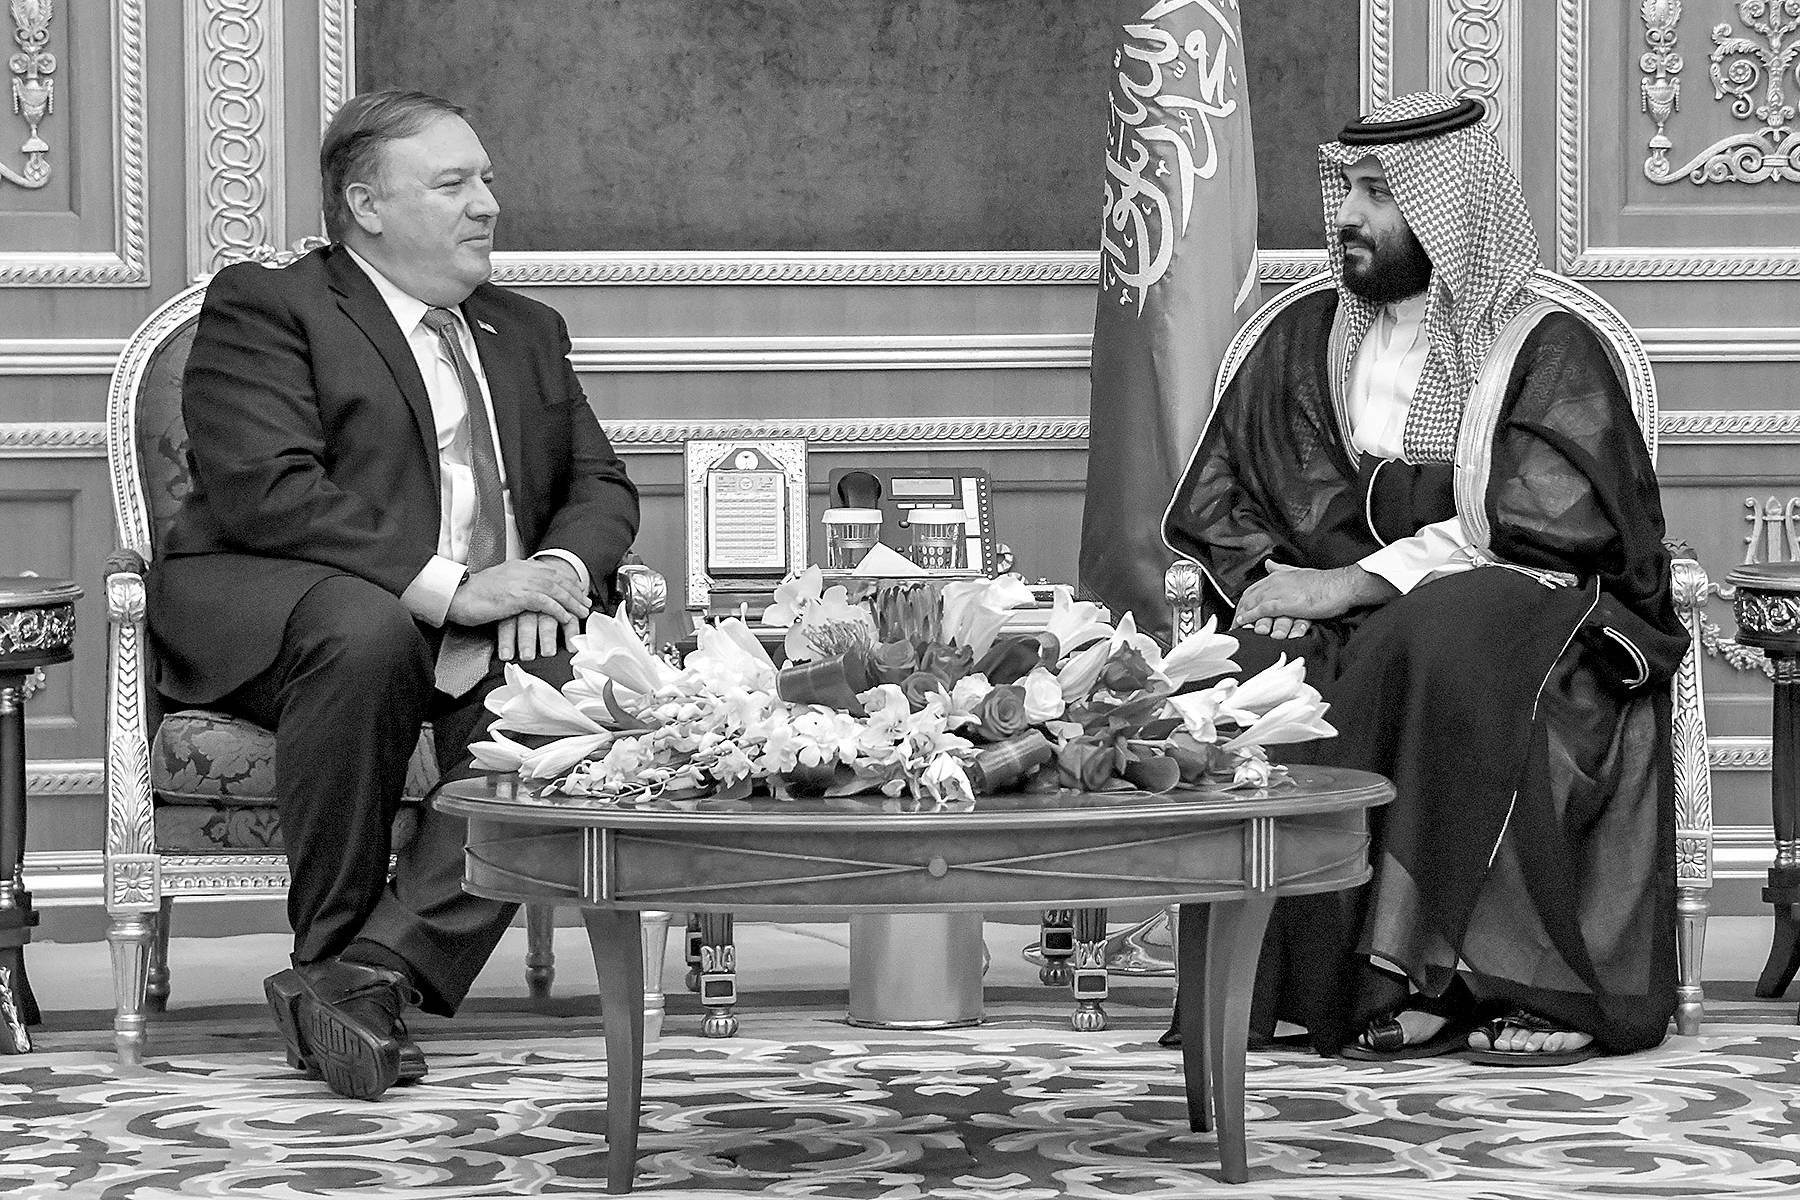 Pompeo offers defense for Saudi rulers as Trump administration strategy shifts in Khashoggi case